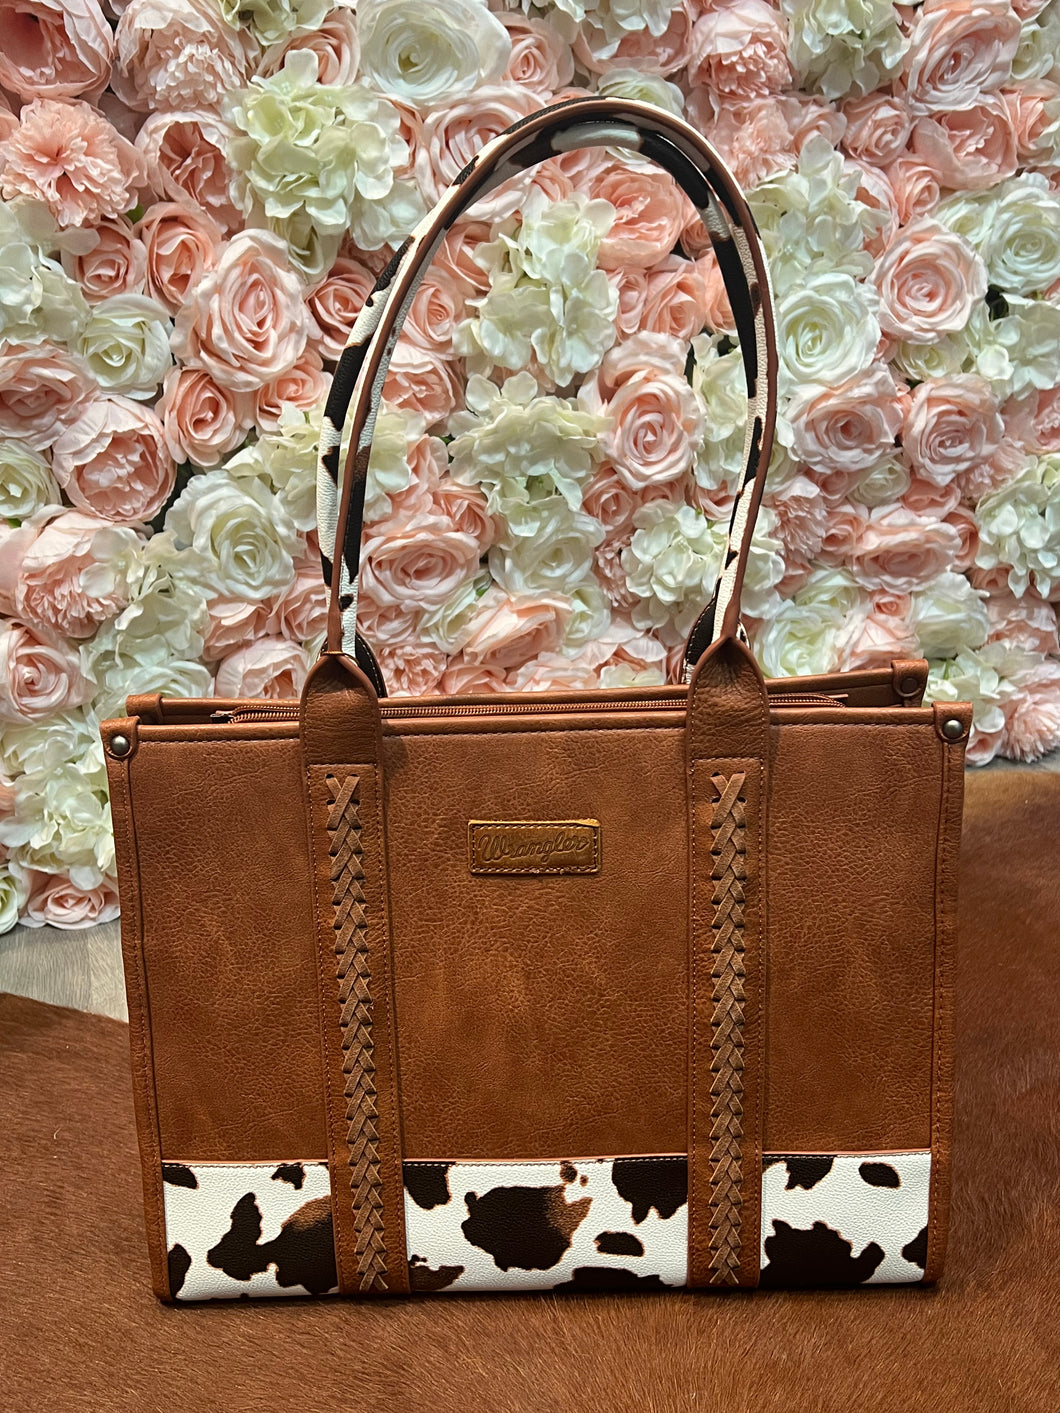 Wrangler Whipstitch Patchwork Tote Large - Brown Cow